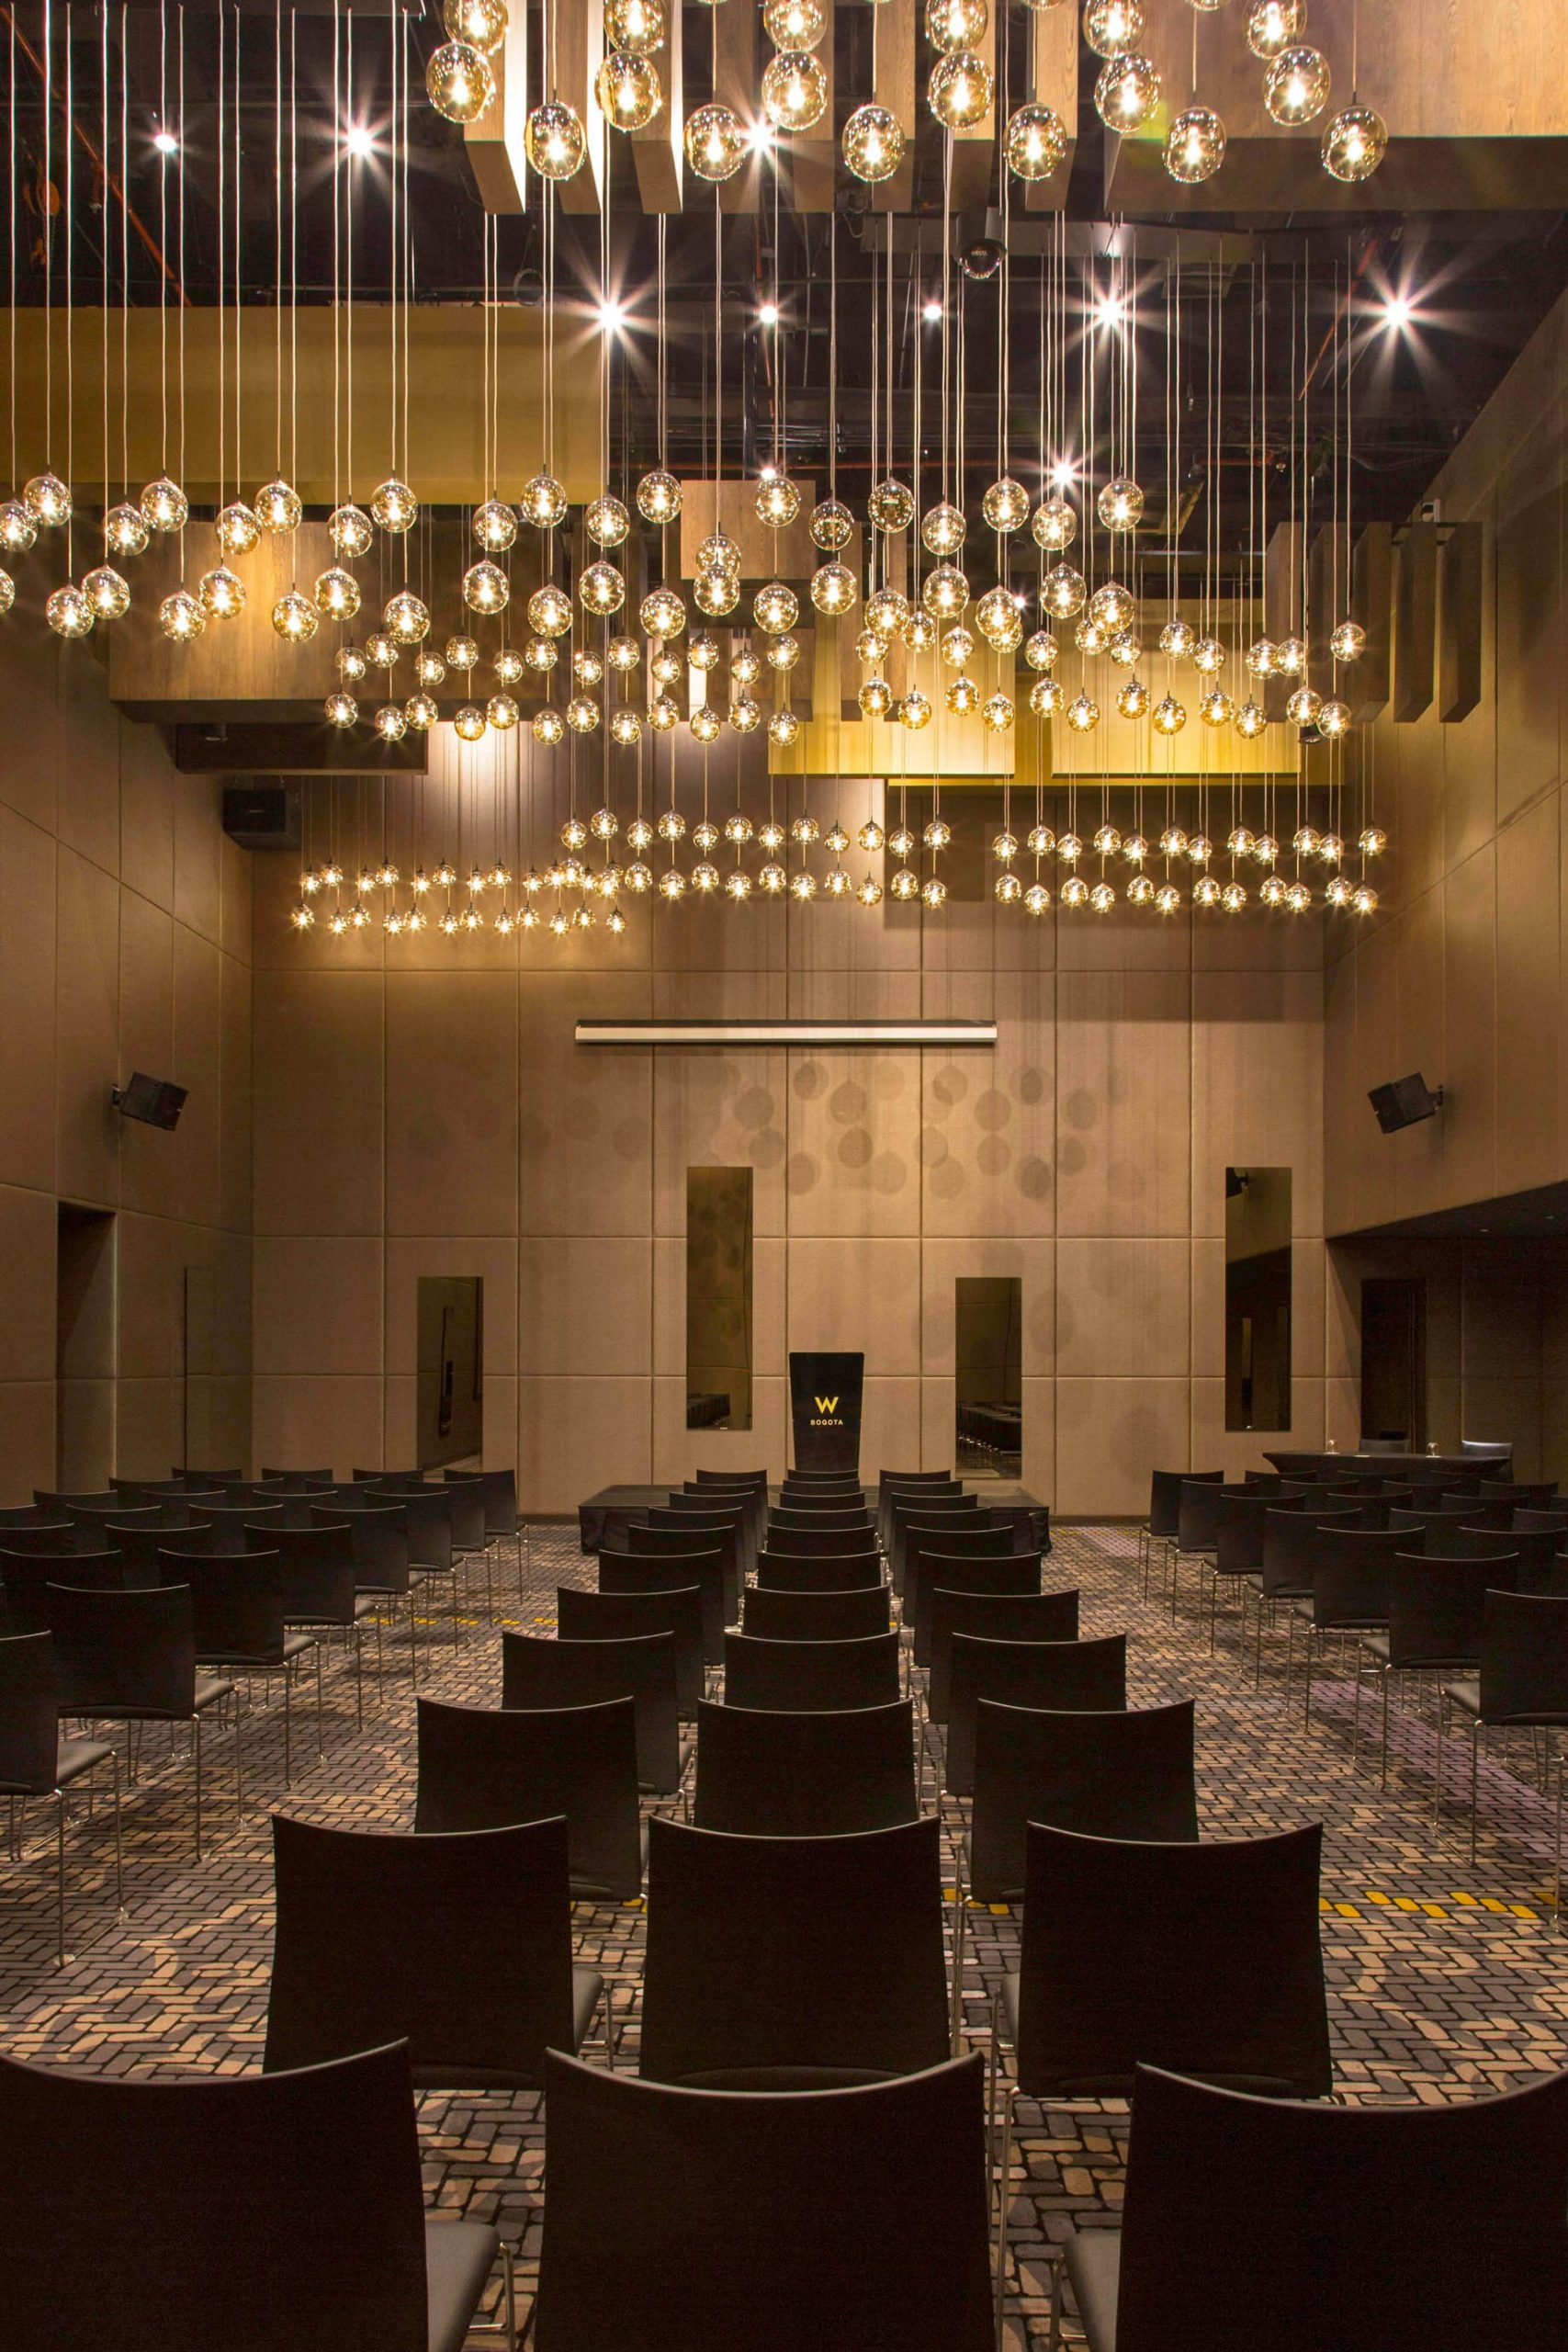 W Bogota Hotel – Bogota, Colombia – Great Room Theater Style Meeting